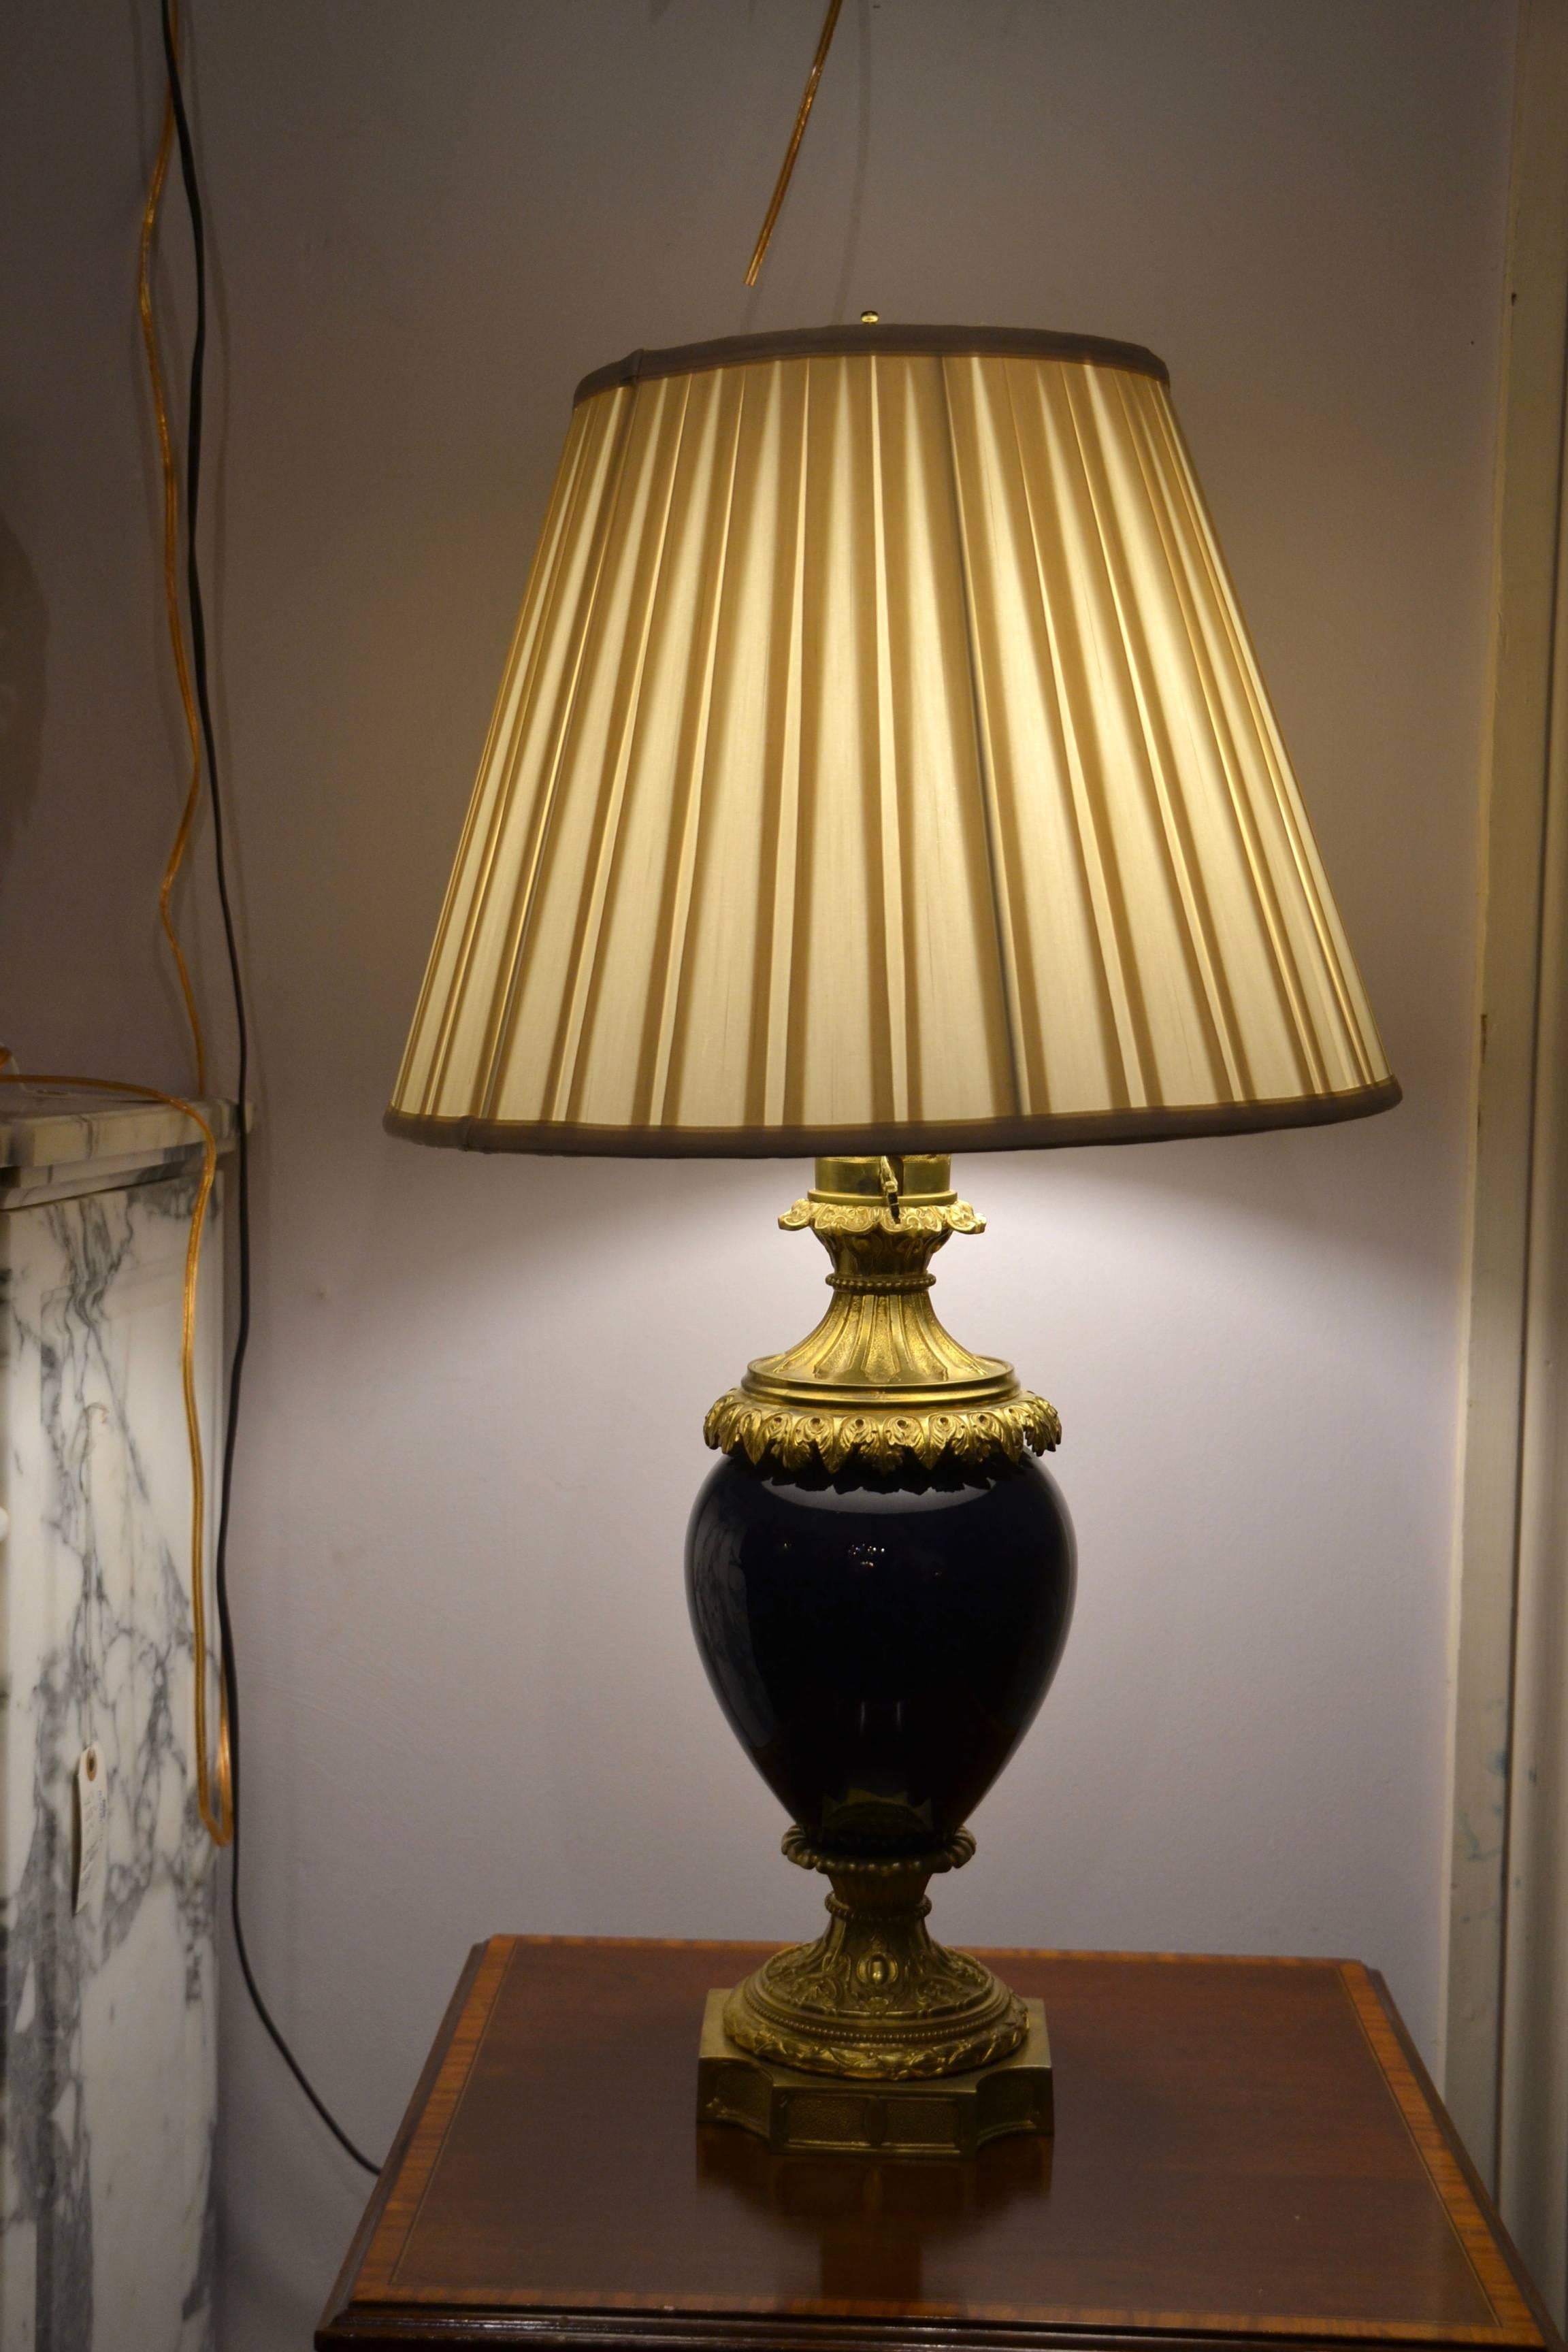 These beautiful cobalt blue lamps would make a fine statement in any room of a home or office. They are simple in design and very pleasing to the eye.